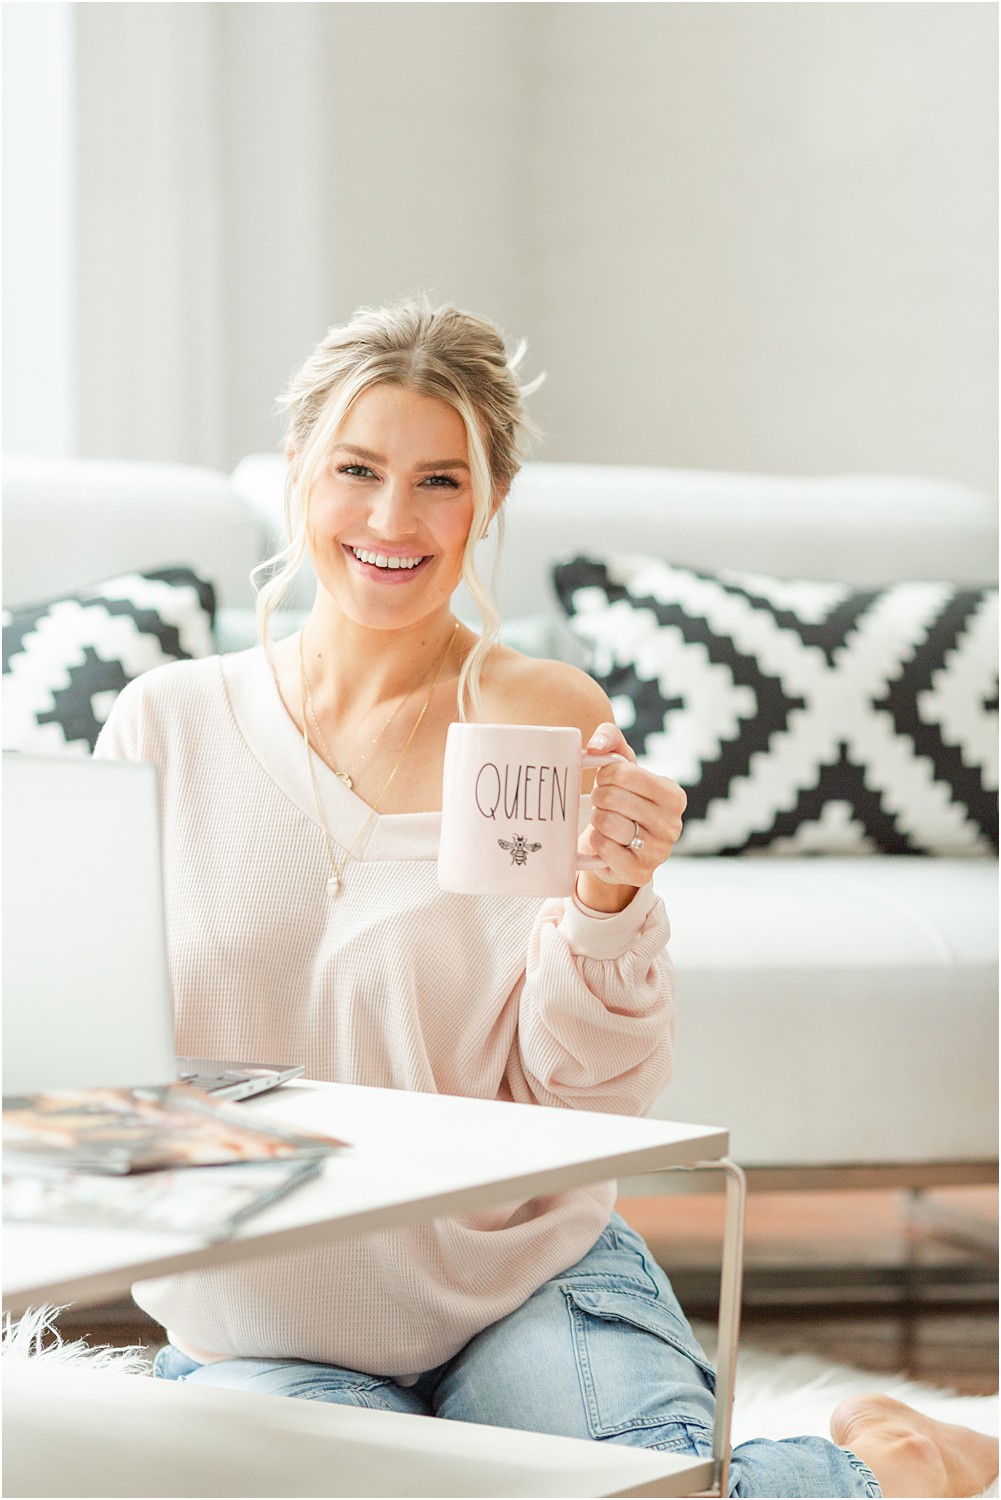 successful business owner holds up Queen bee mug during branding photos